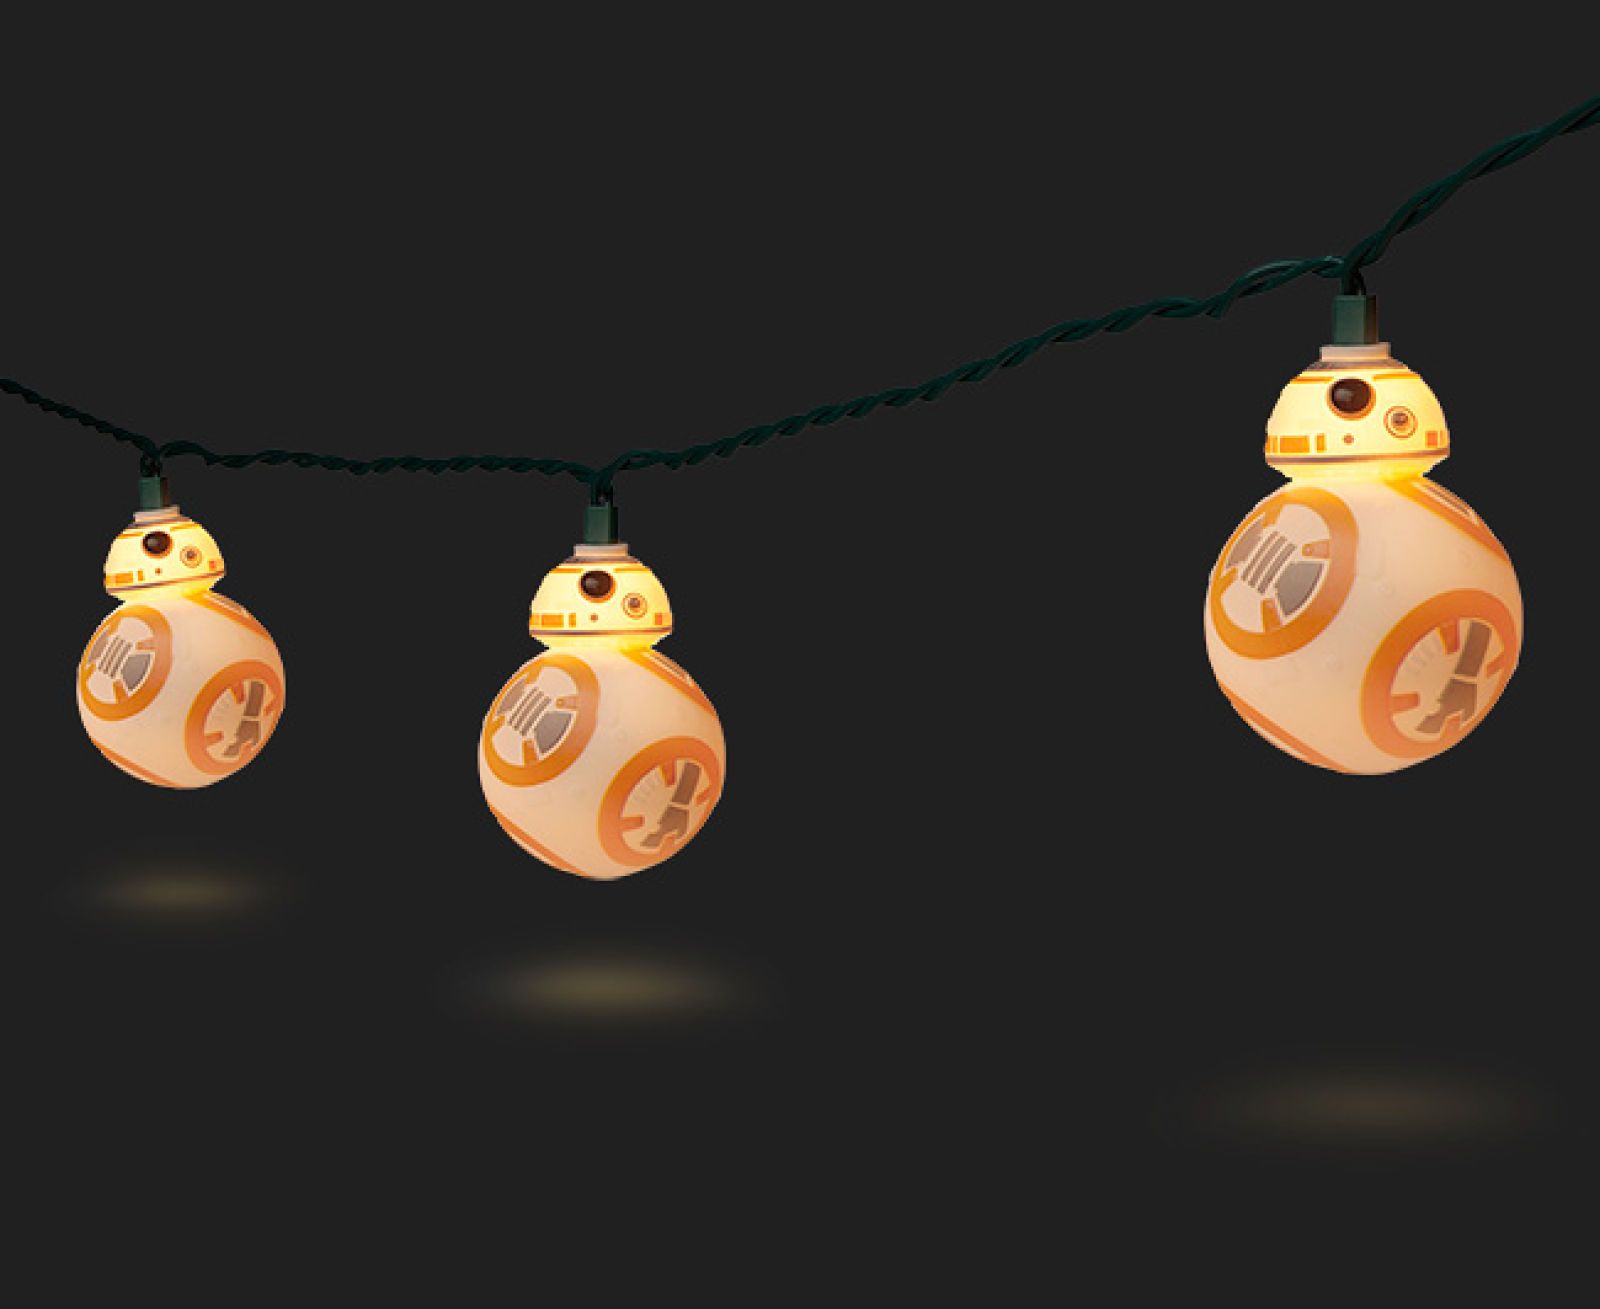 13 Best Christmas Decorations Every Geek Should Own image 15